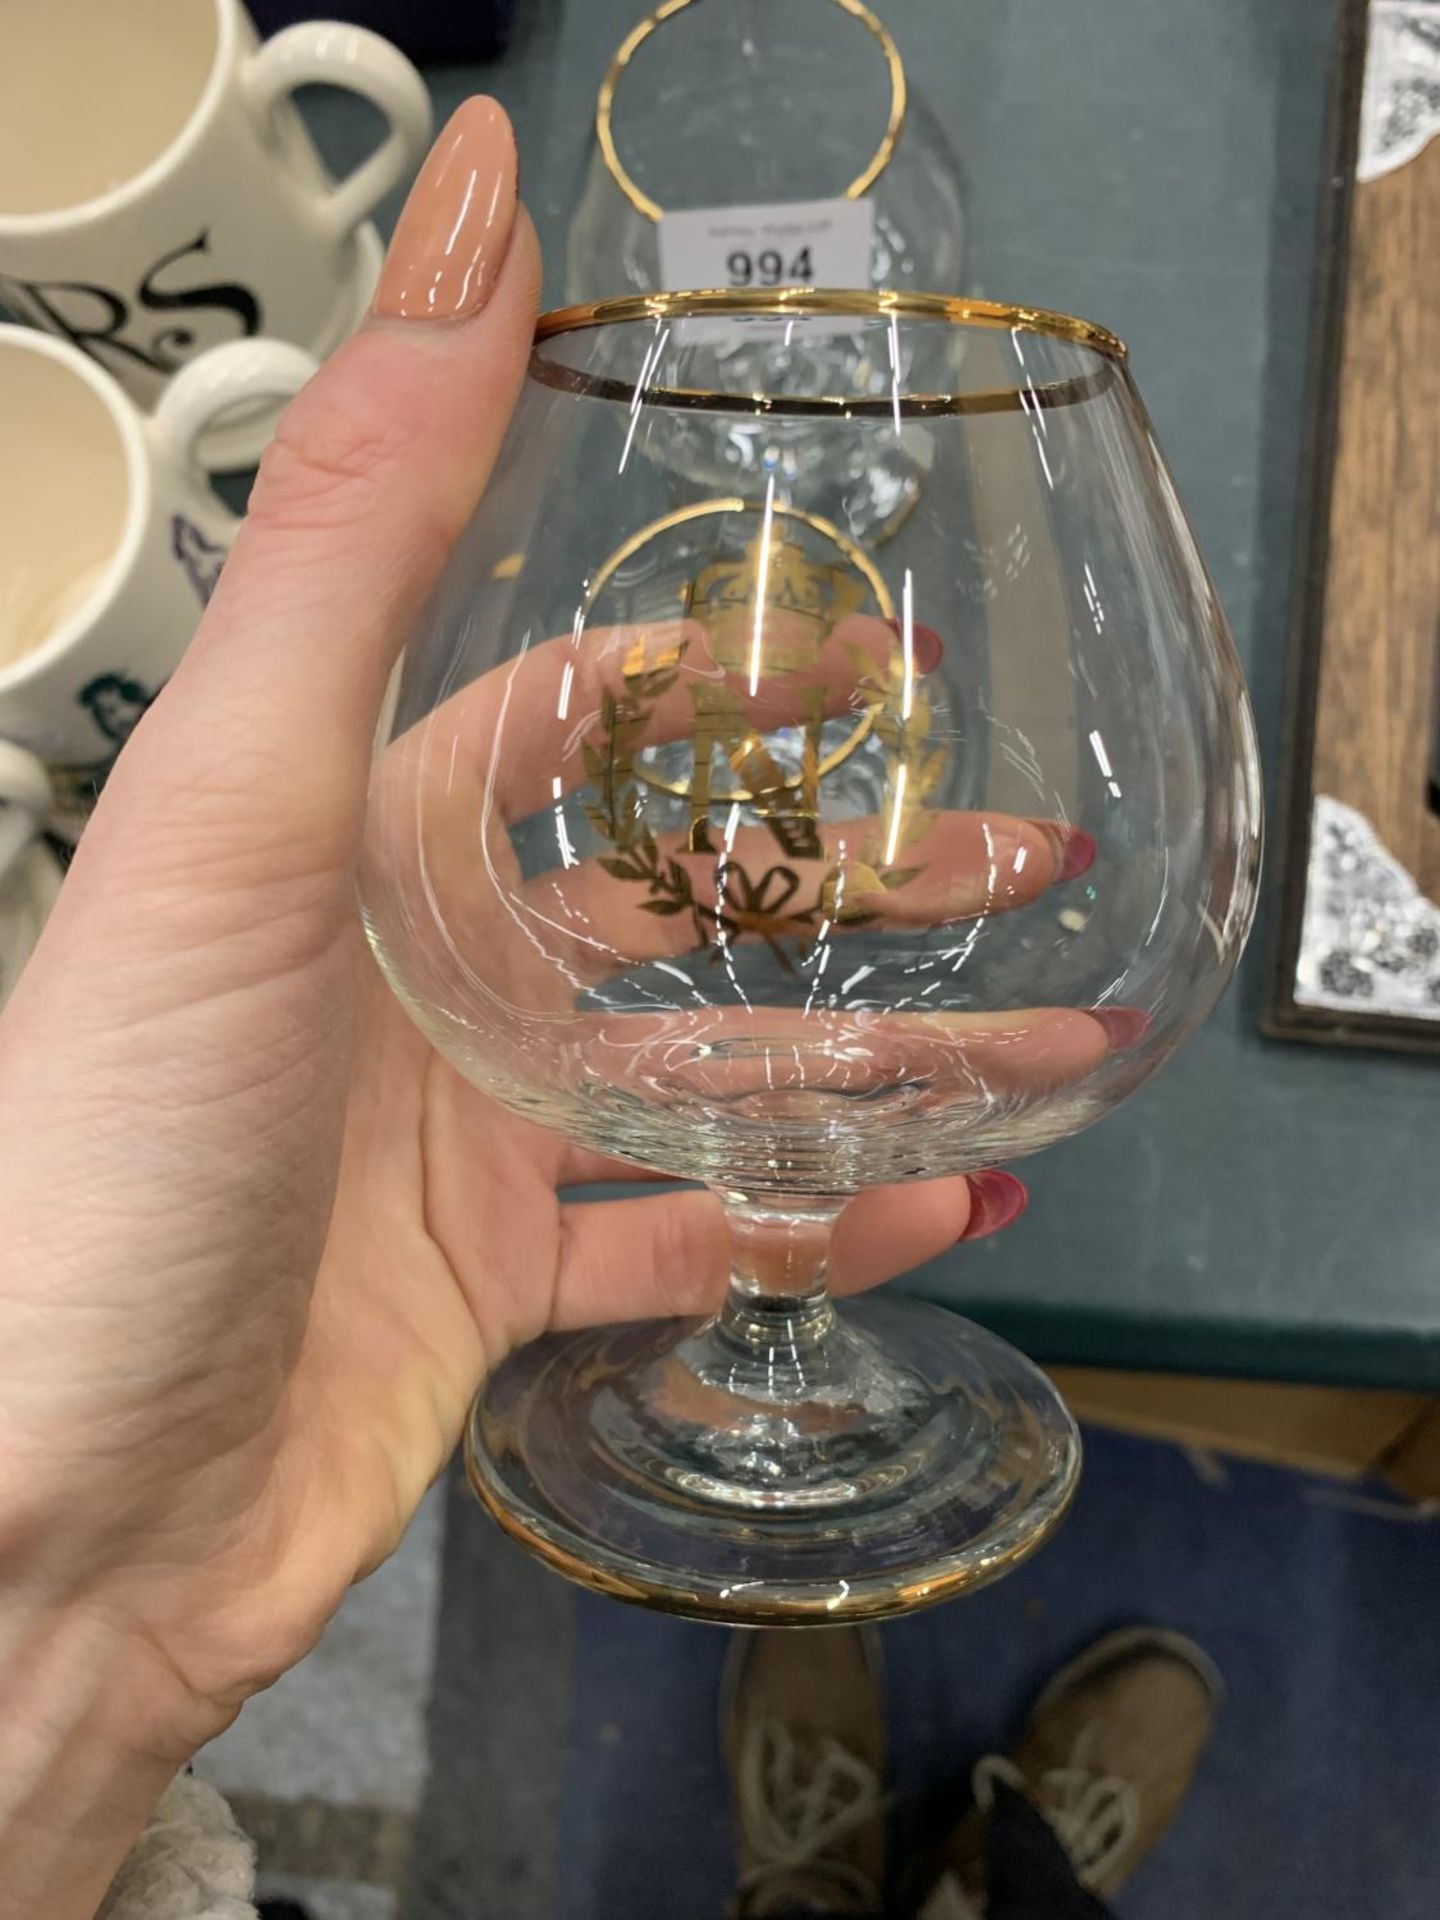 A SET OF BRANDY GLASSES WITH GOLD RIM AND EMBLEM - Image 2 of 3